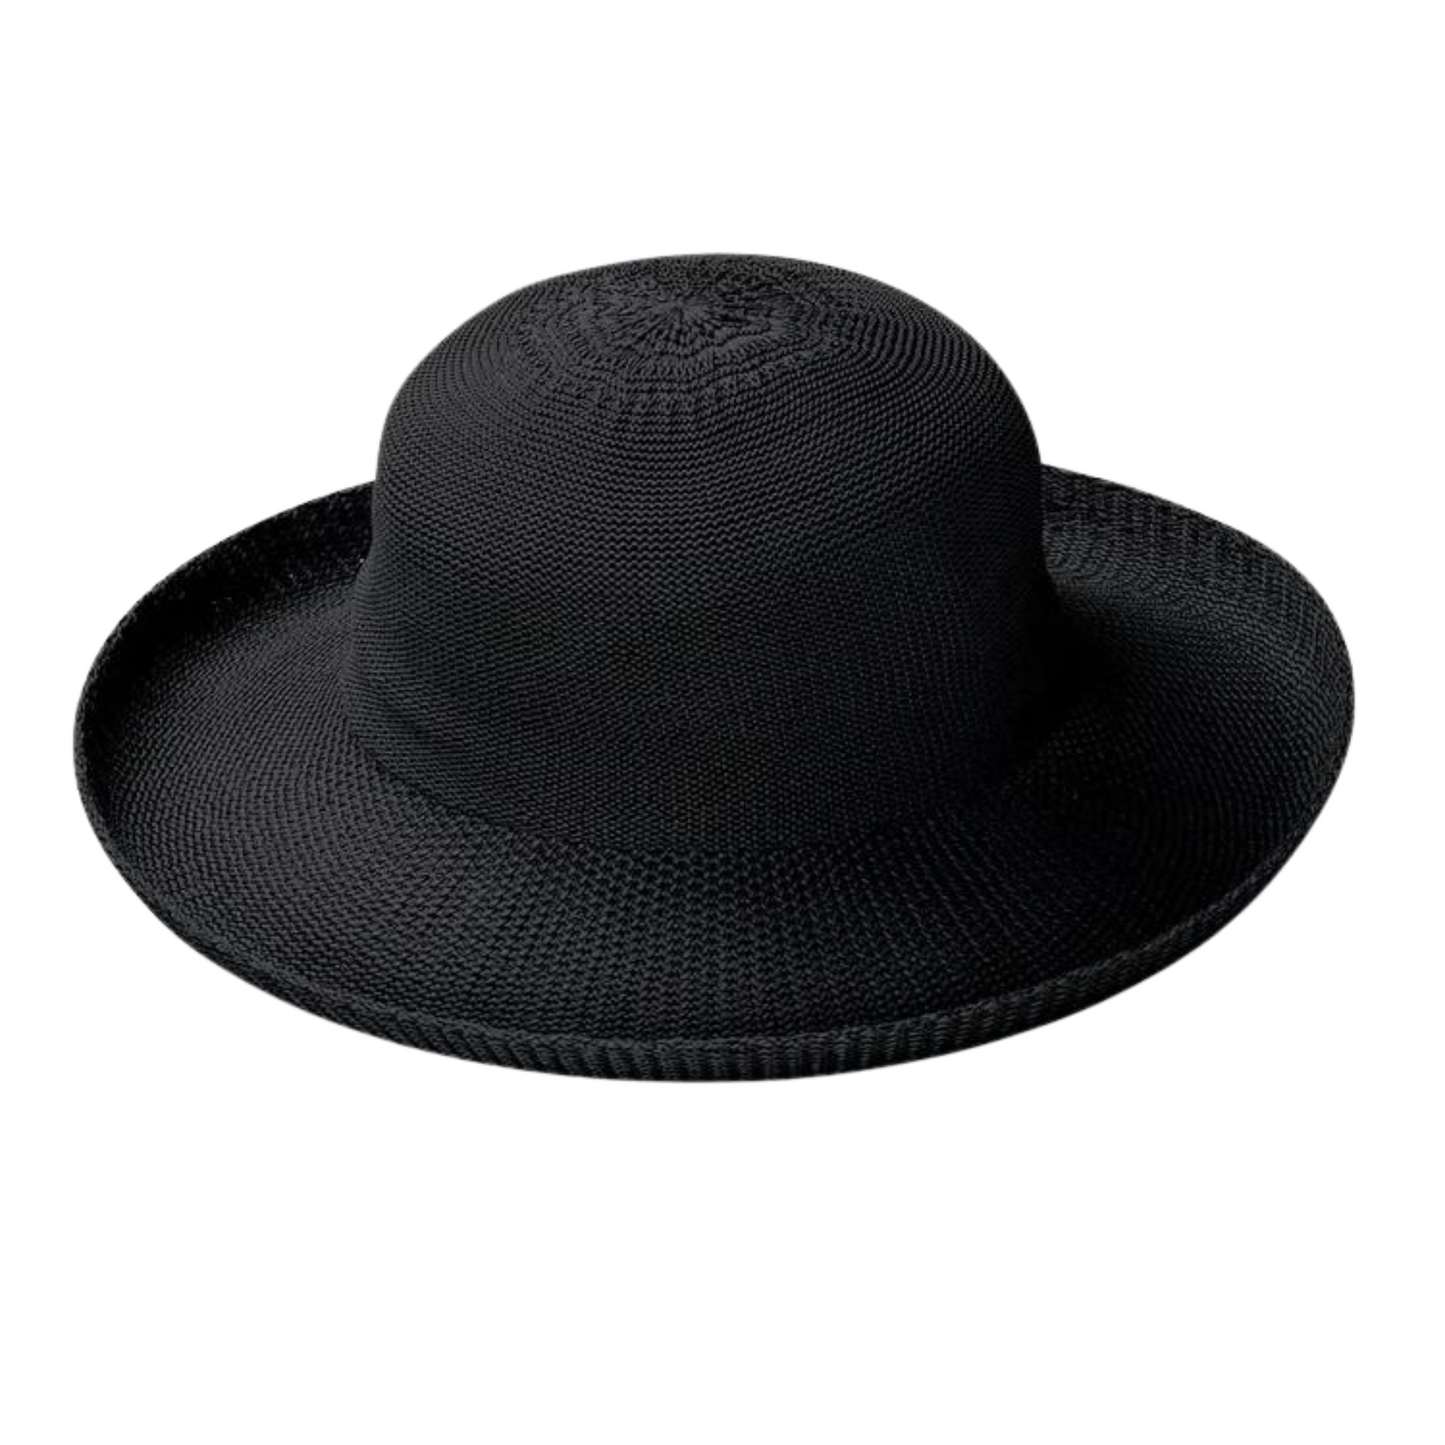 Black weaved hat with soft curvature and rolled in brim.